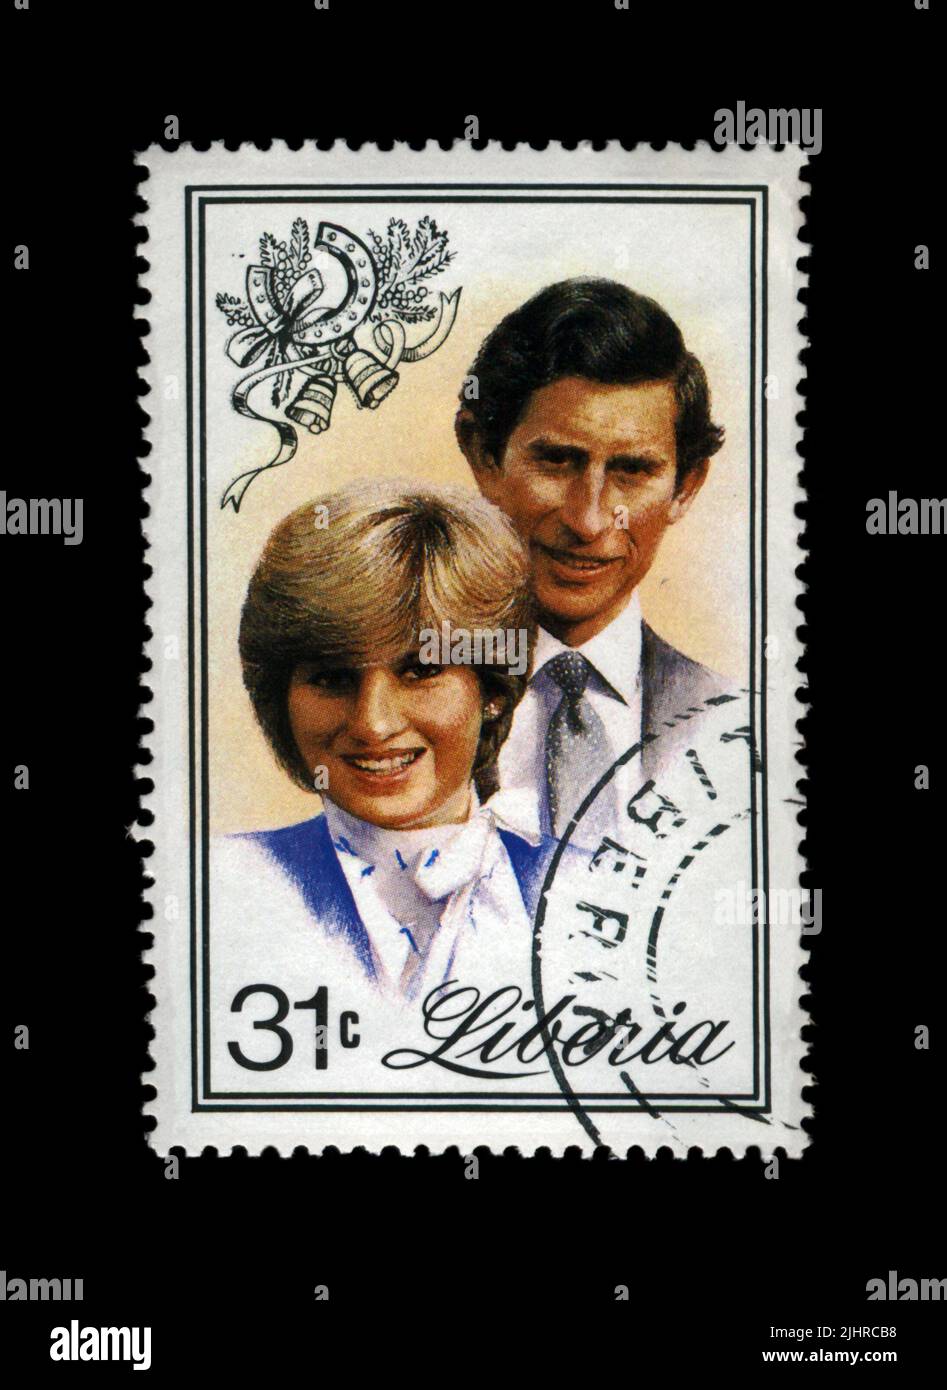 21st Birthday of princess Diana. canceled stamp of LIBERIA dedicated to the memory of Lady Di, Princess of Wales. vintage post stamp isolated Stock Photo